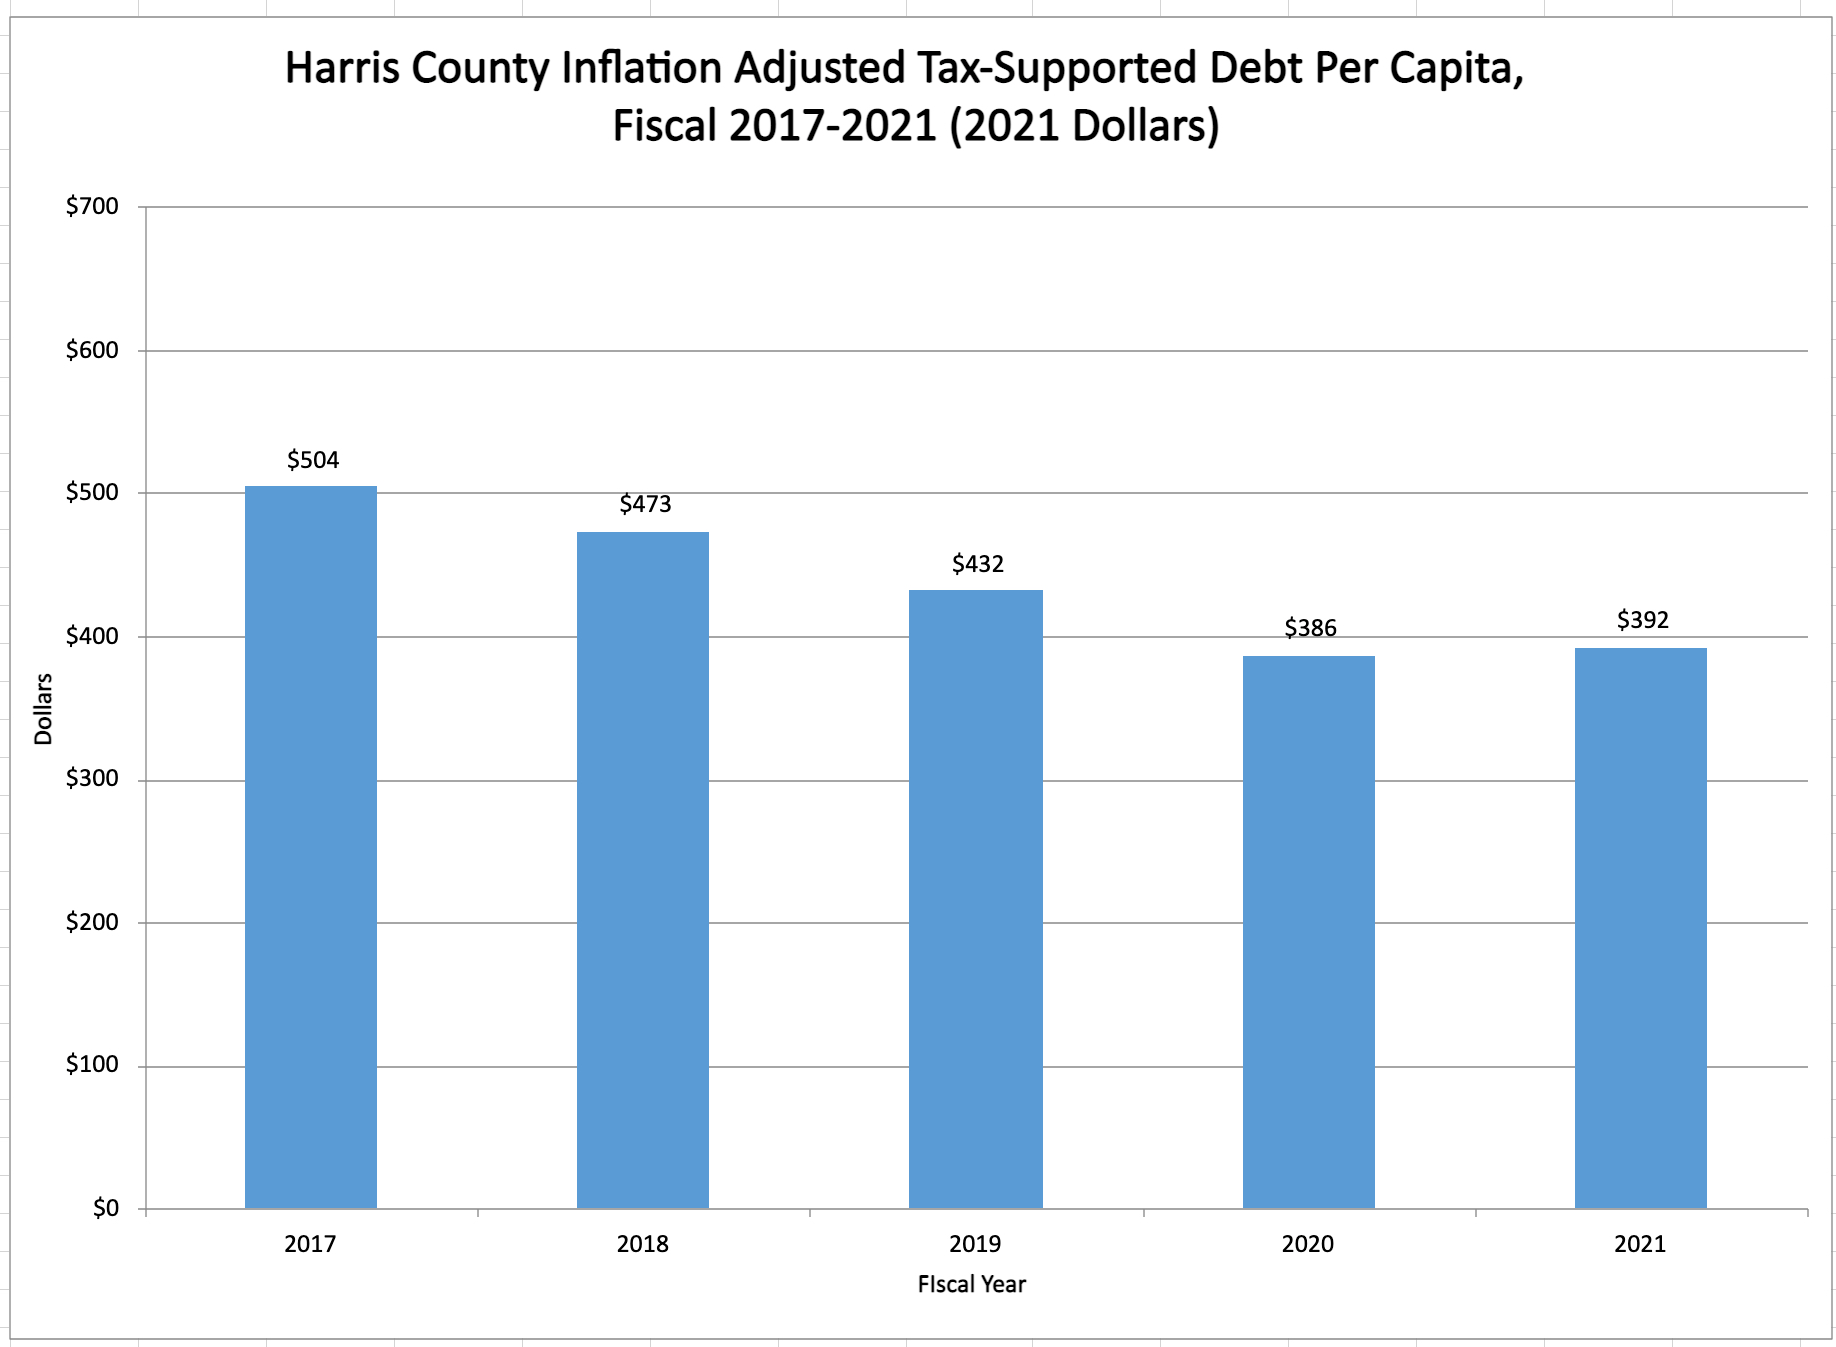 HC Inflation Adjusted Tax-Supported Debt Per Capita,Fiscal 2017-2021 (2021 Dollars)